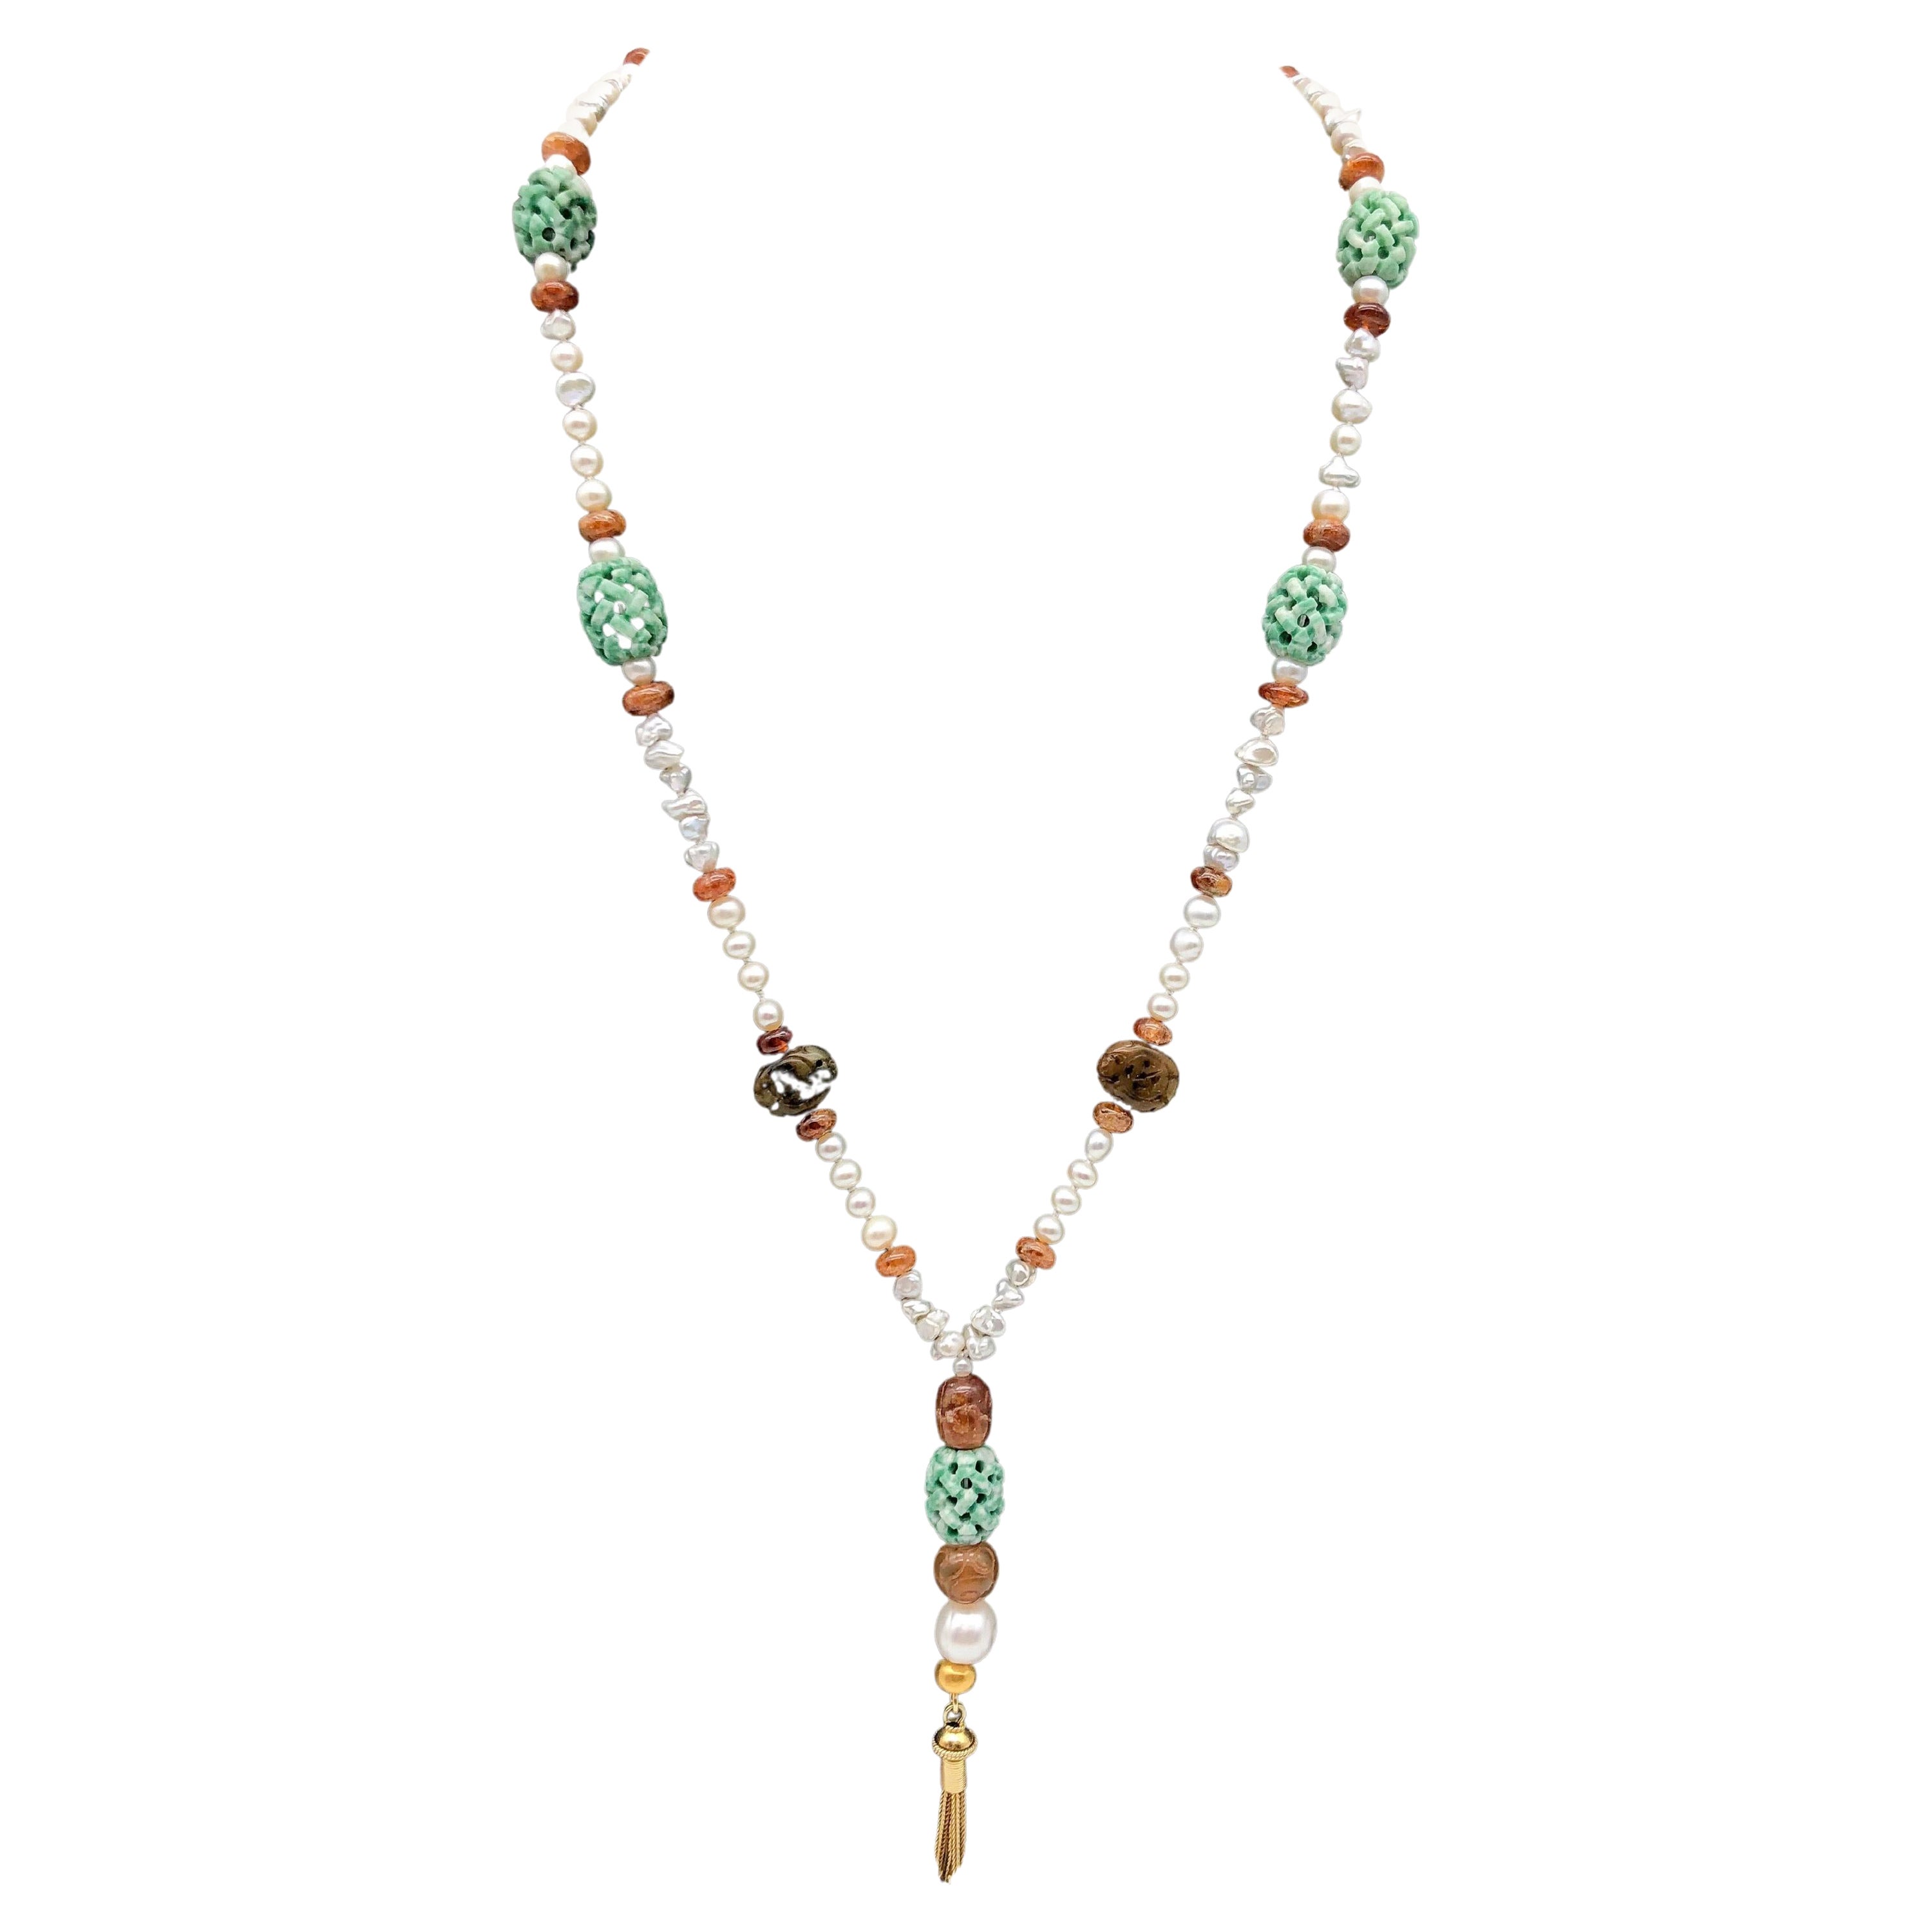 A.Jeschel Splendid Long Pearl, Hessonite, and Tobacco Jade Necklace